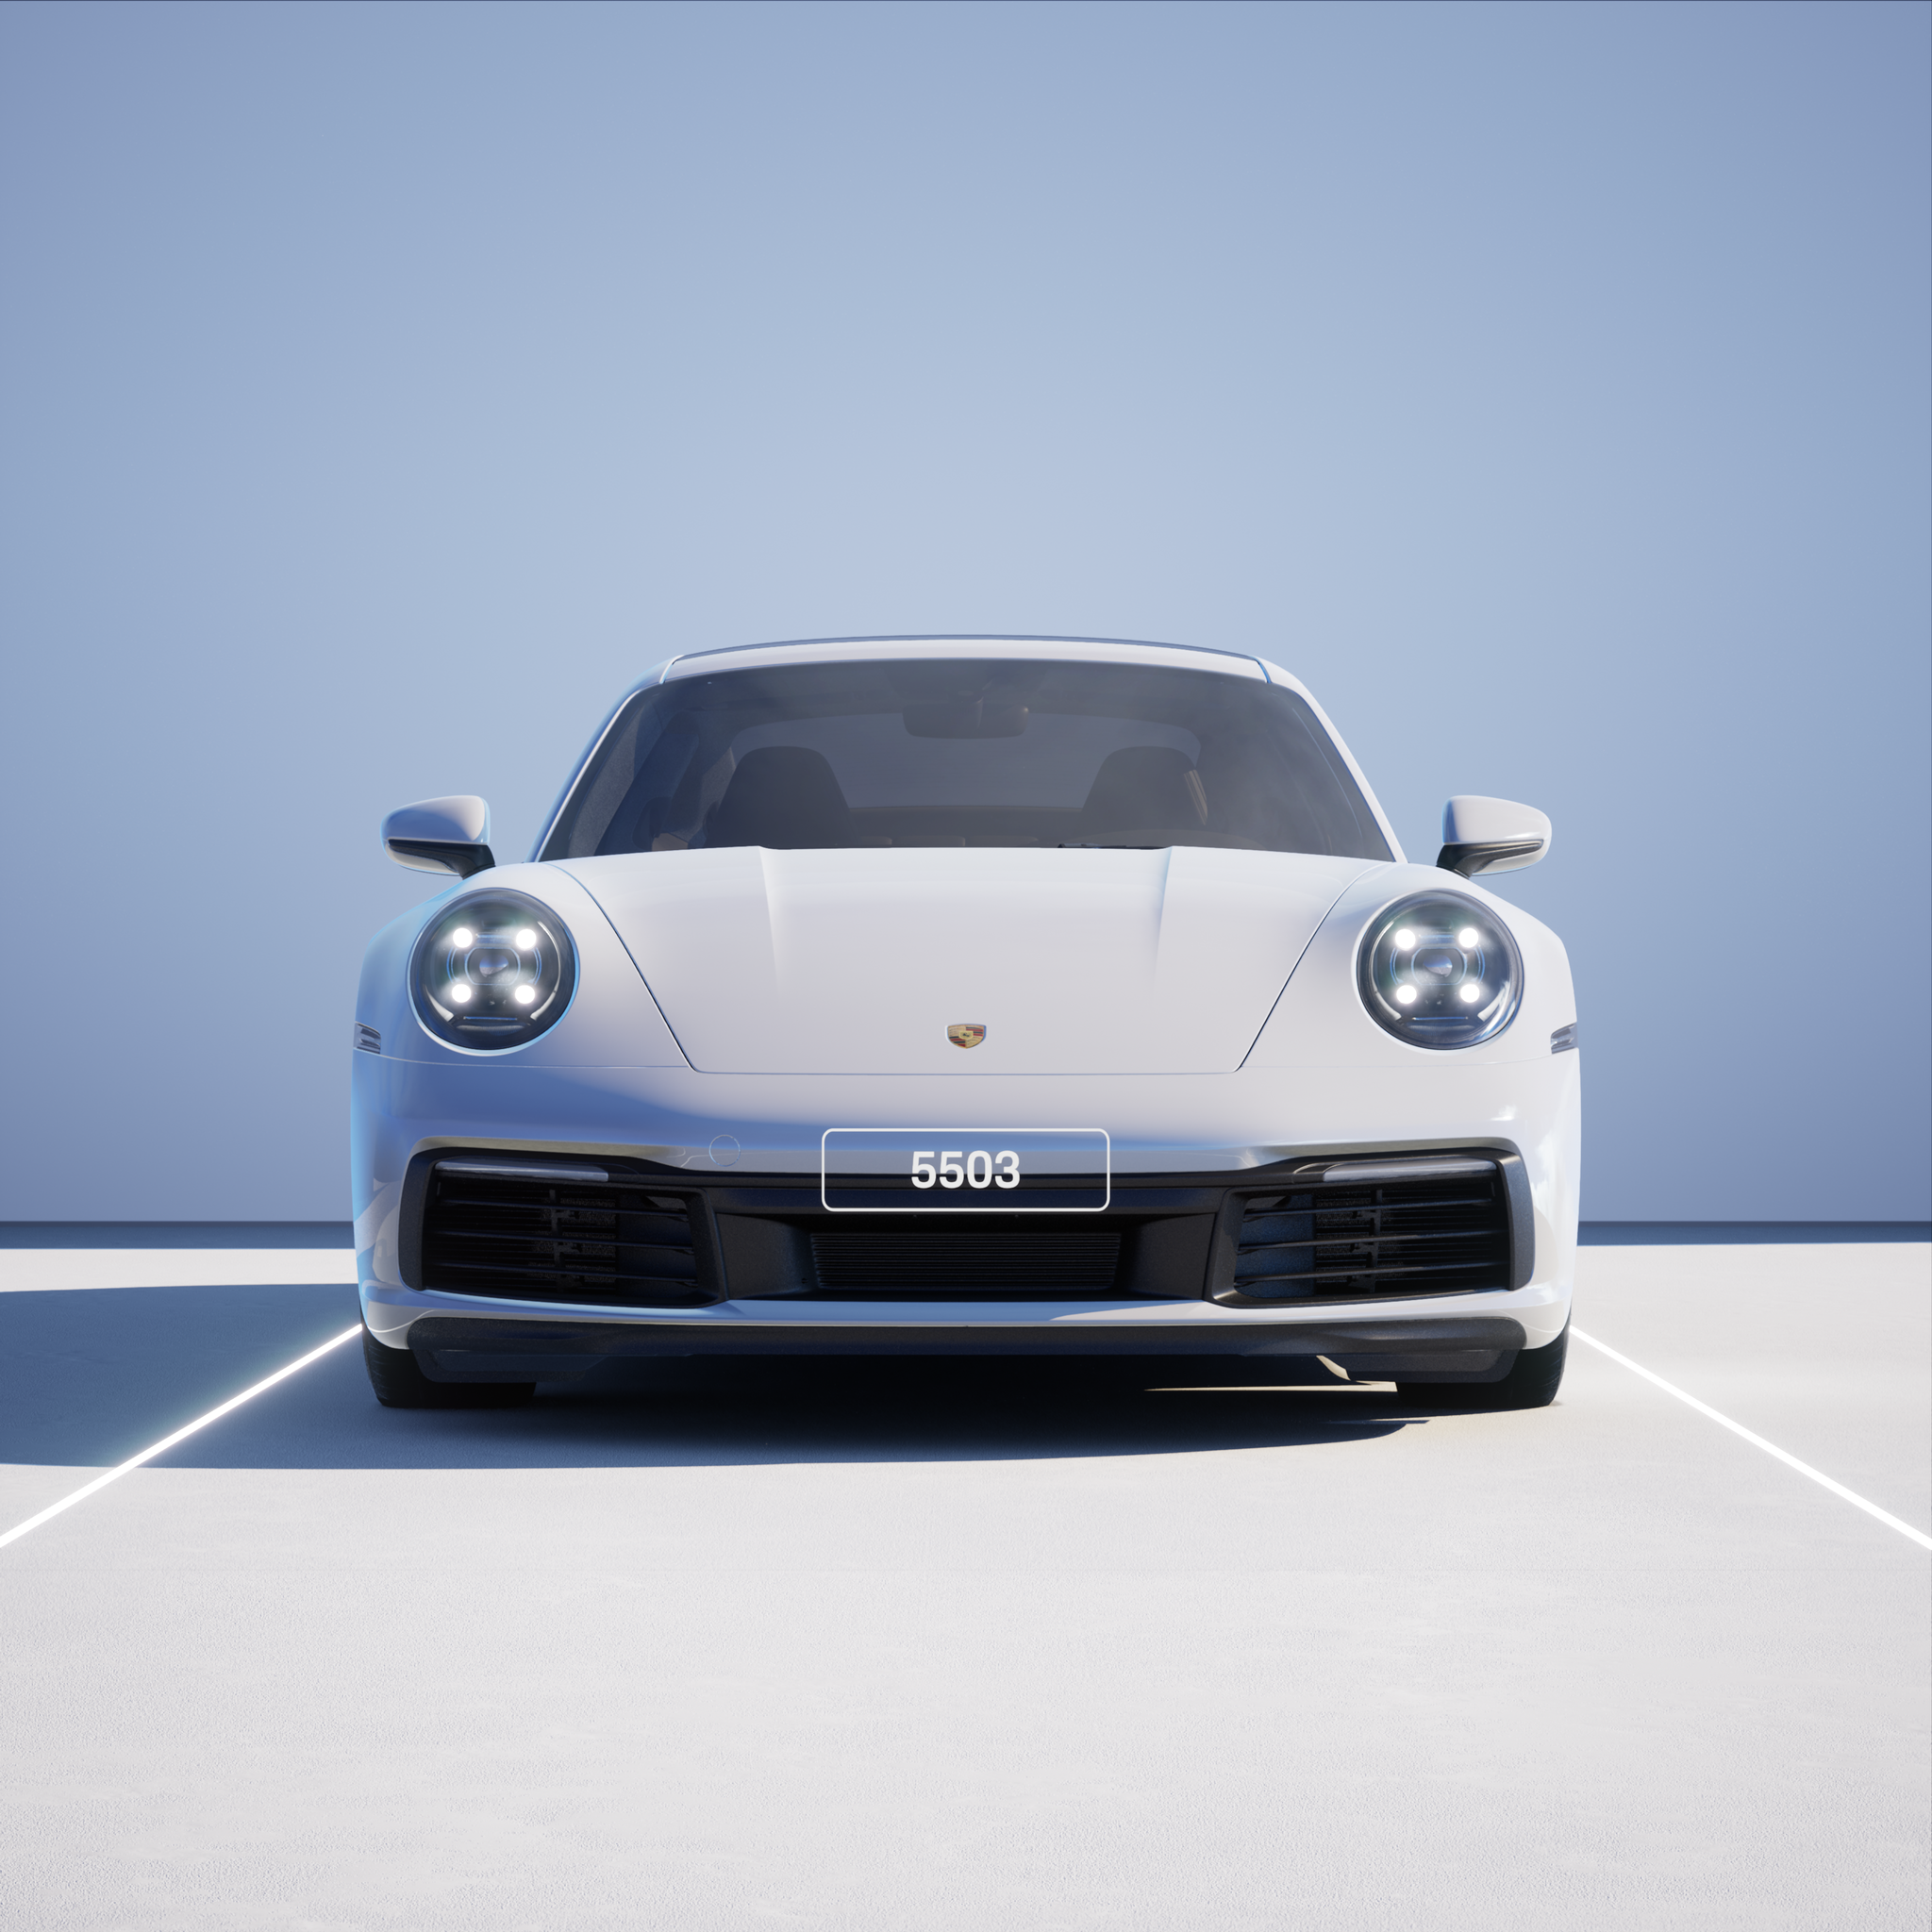 The PORSCHΞ 911 5503 image in phase